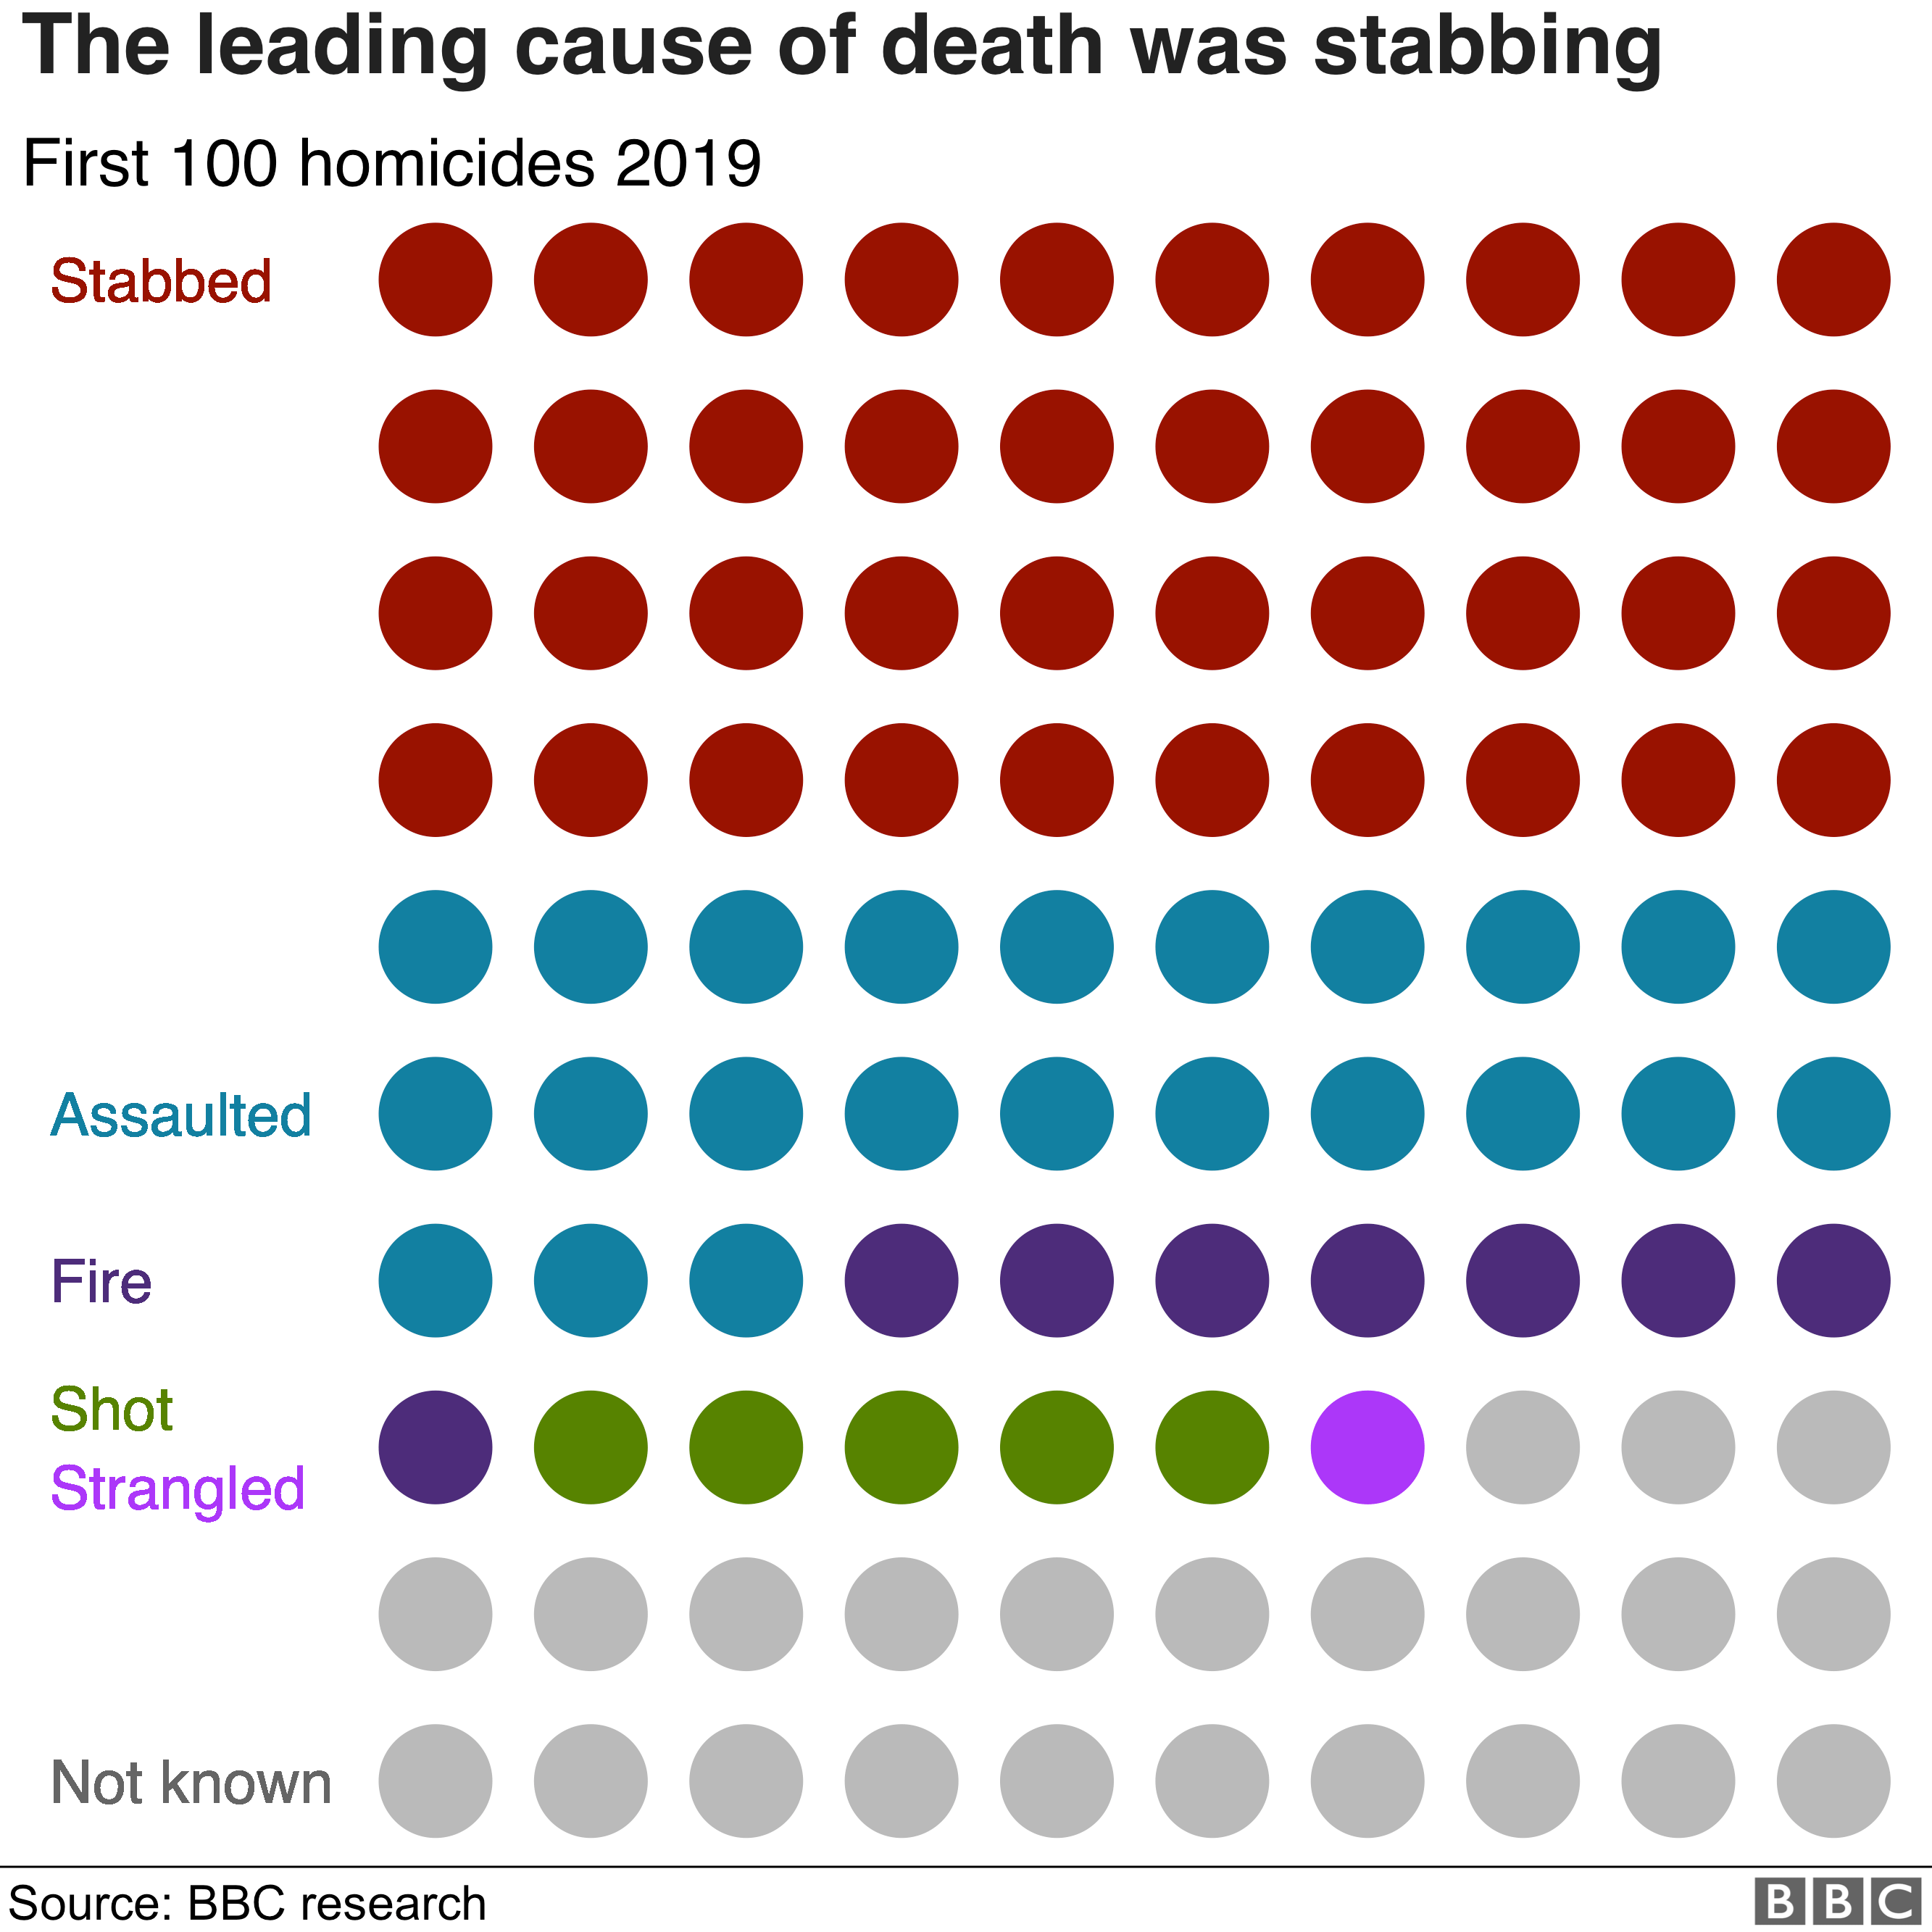 The leading cause of death was stabbing